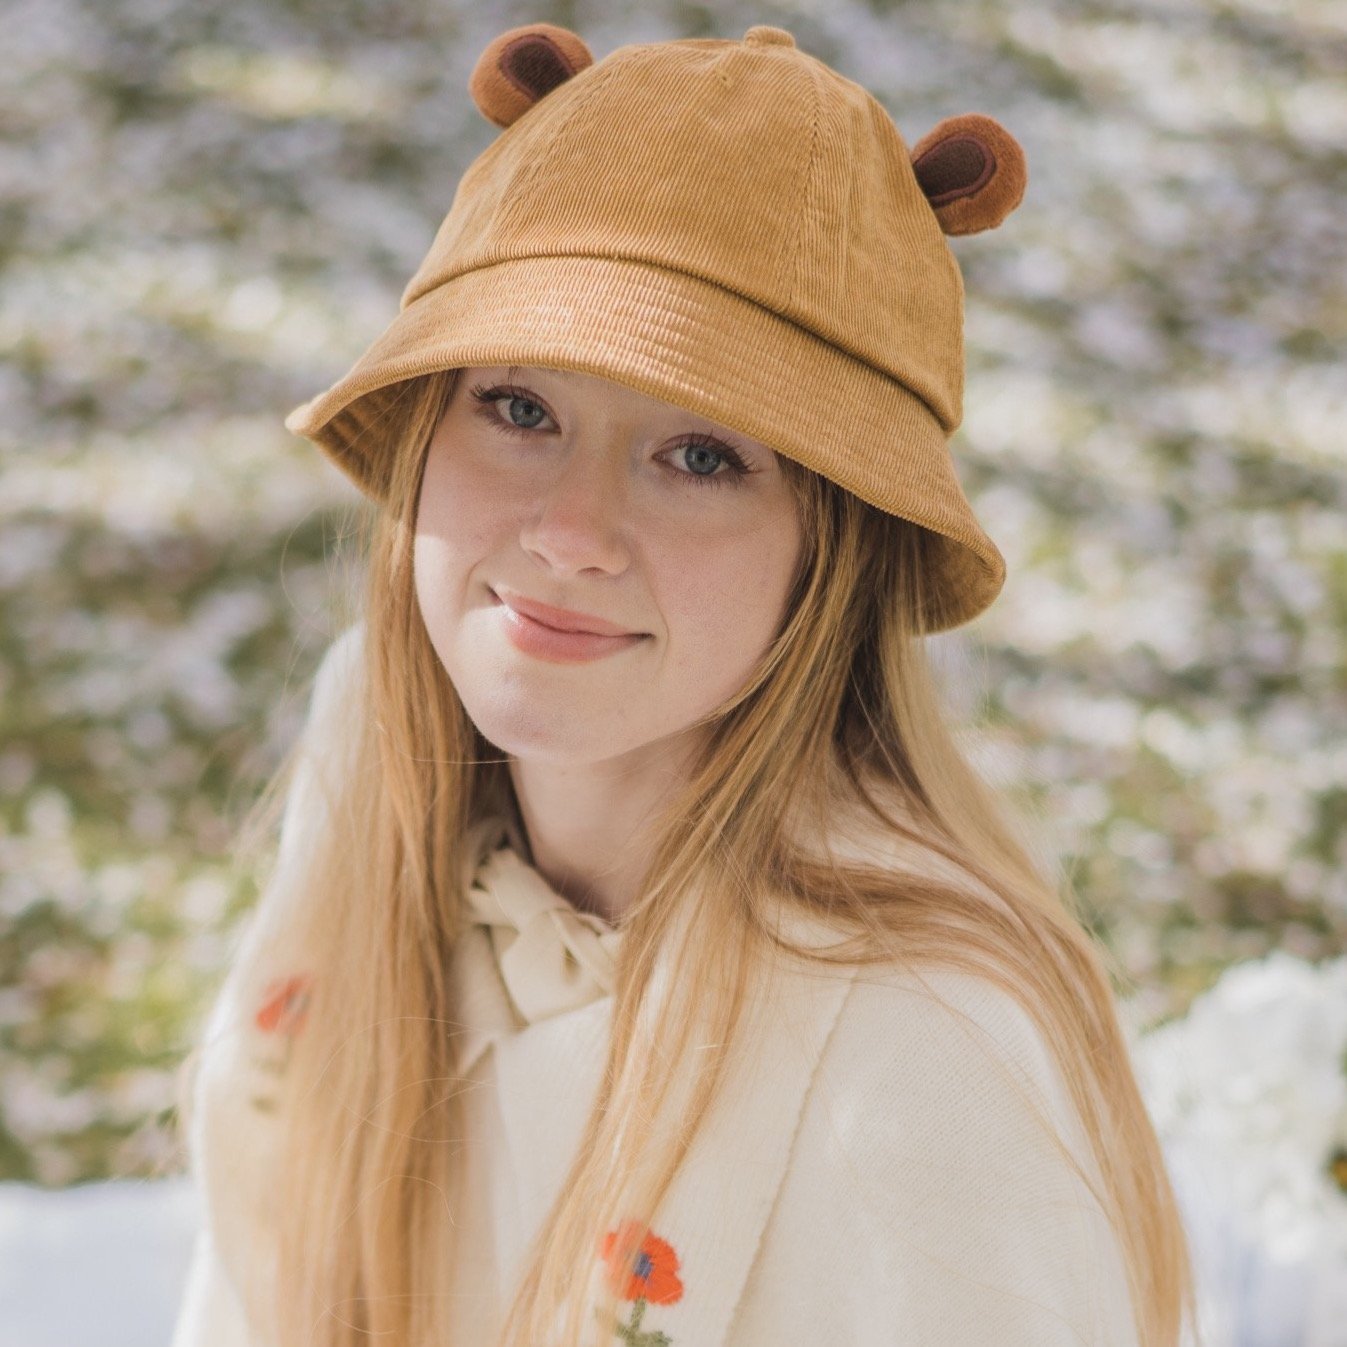 Bear Bucket Hat for Women and Kids.